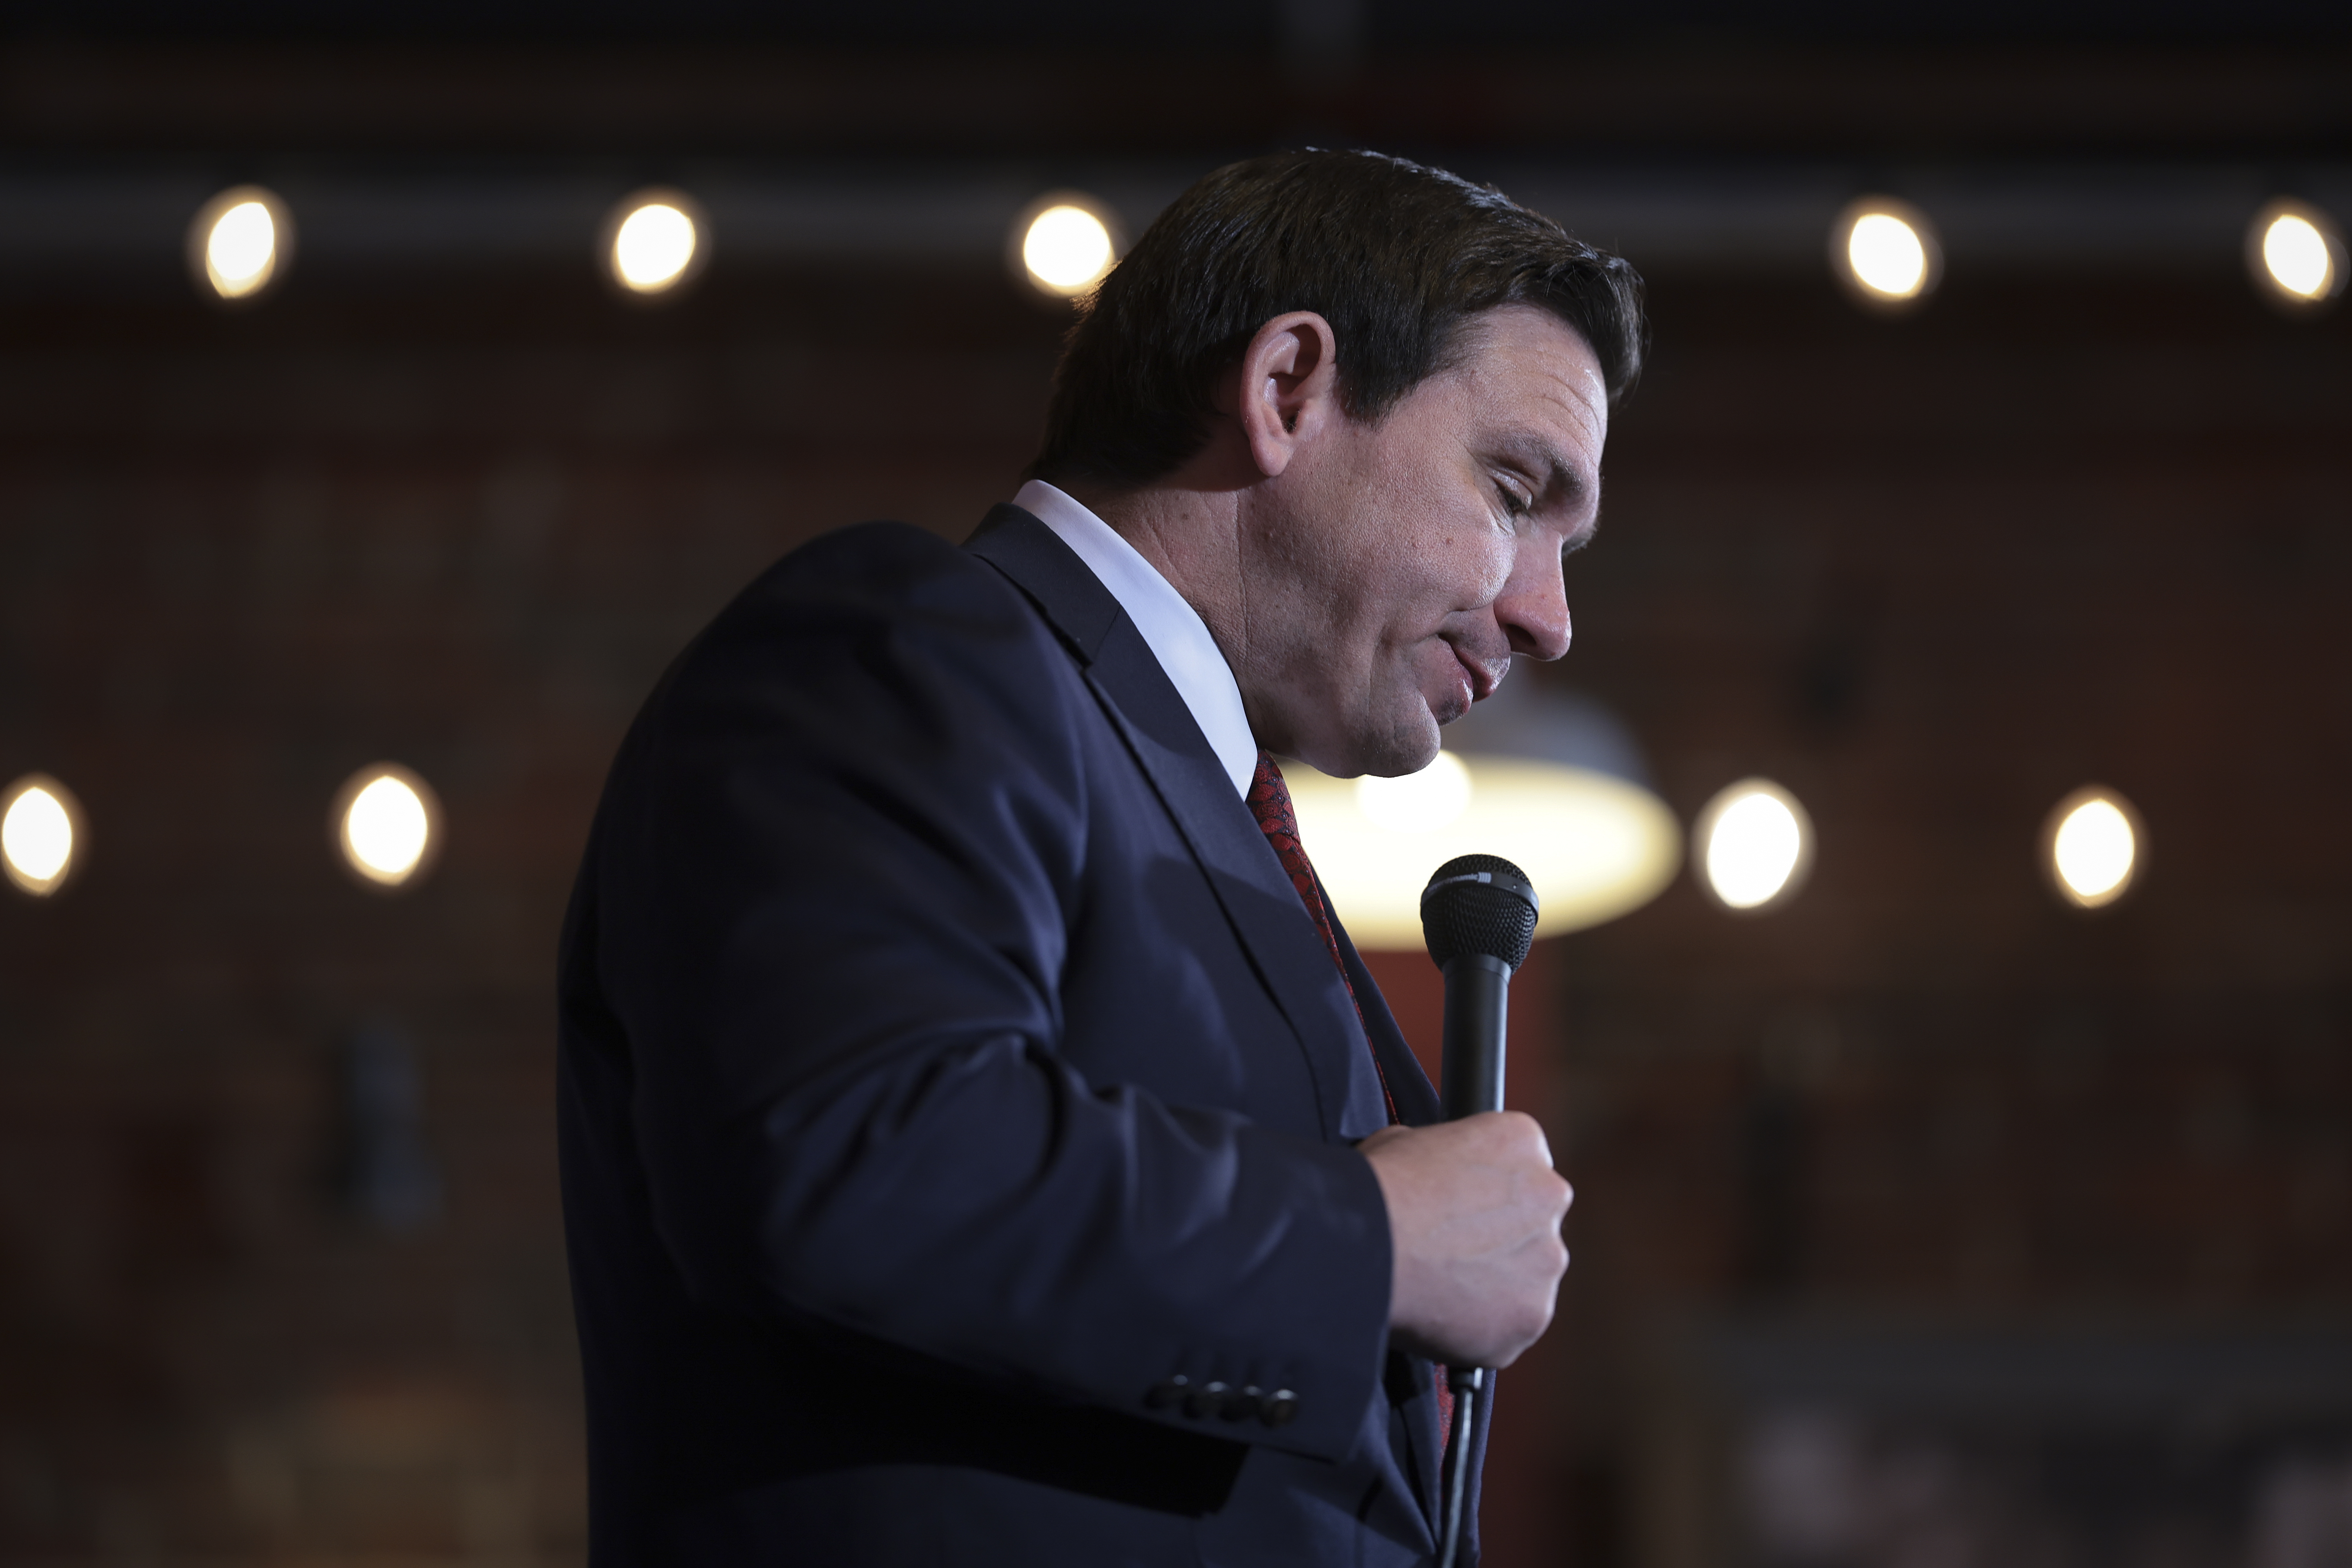 DeSantis in a dark suit against a background of lights, looks down and holds a microphone.